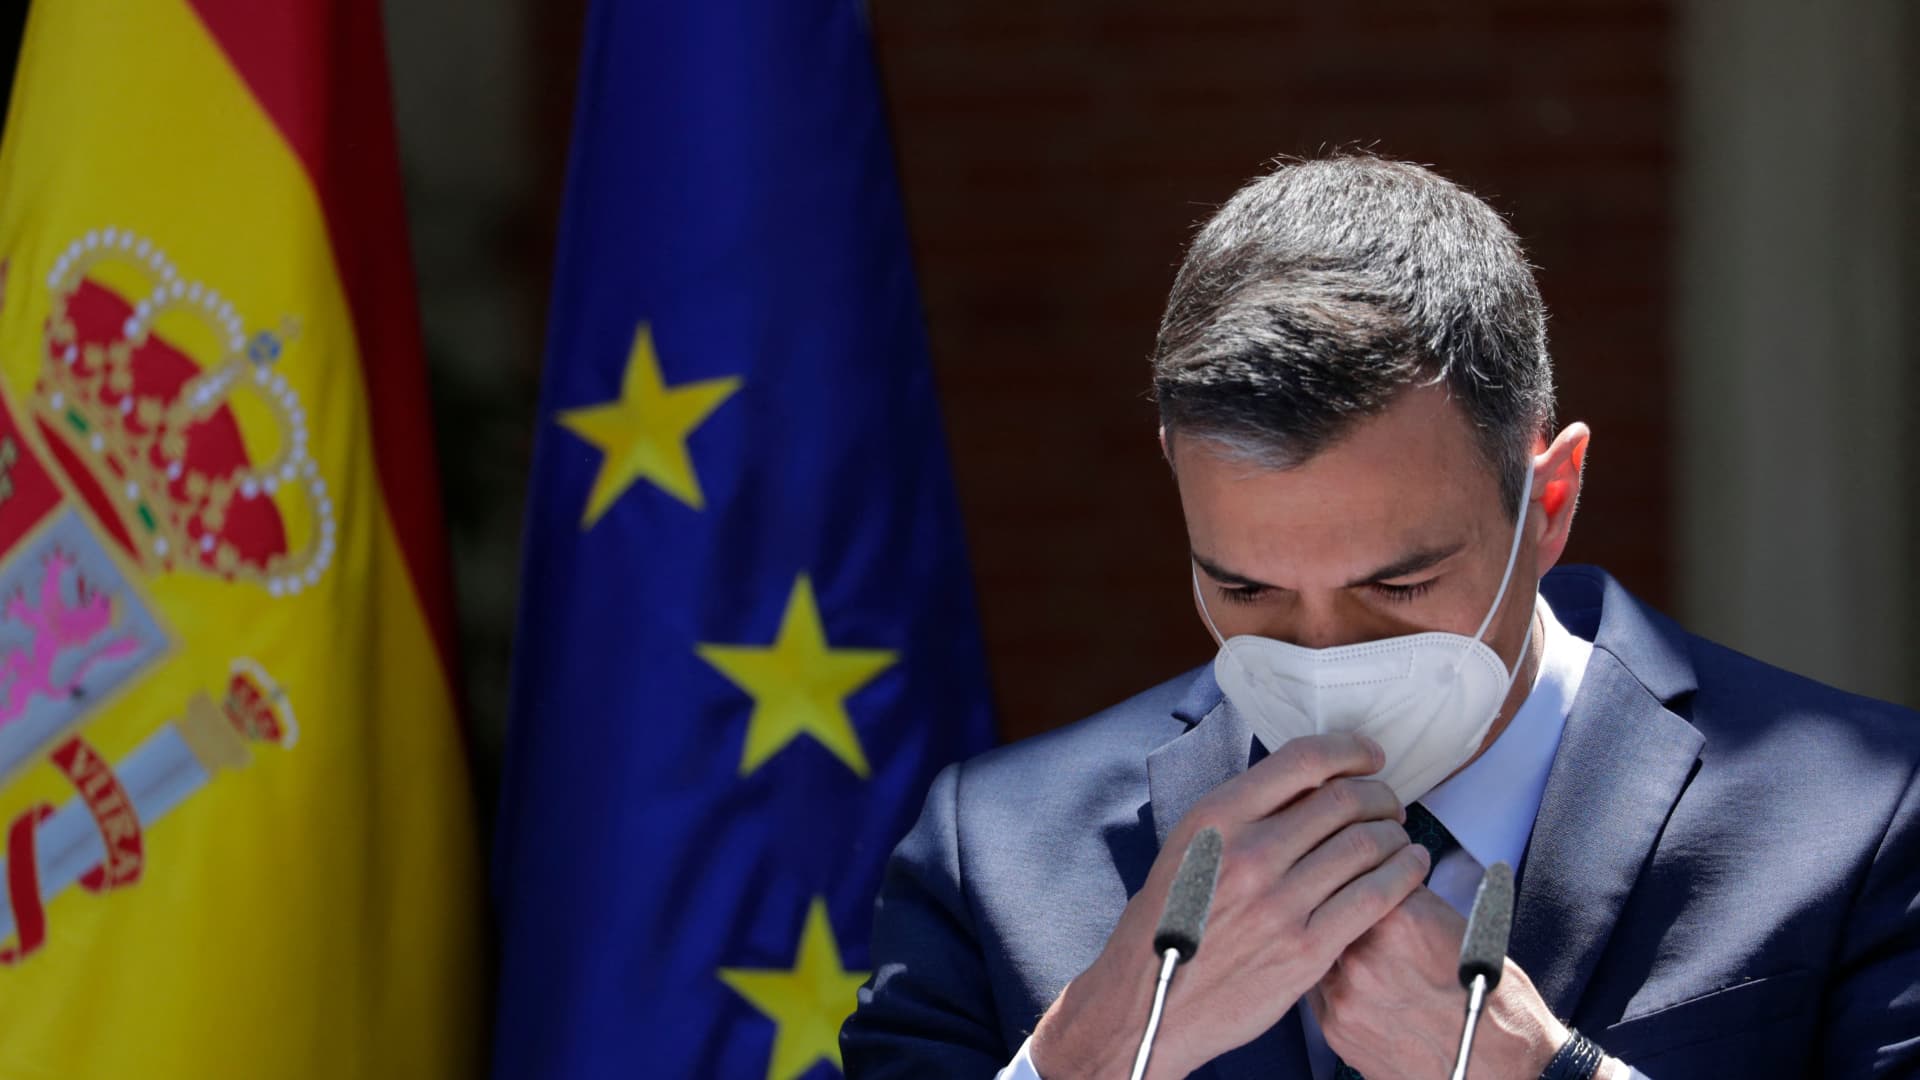 Spain's Prime Minister Pedro Sanchez puts on his mask after making a statement at the Moncloa Palace in Madrid, on May 18, 2021.